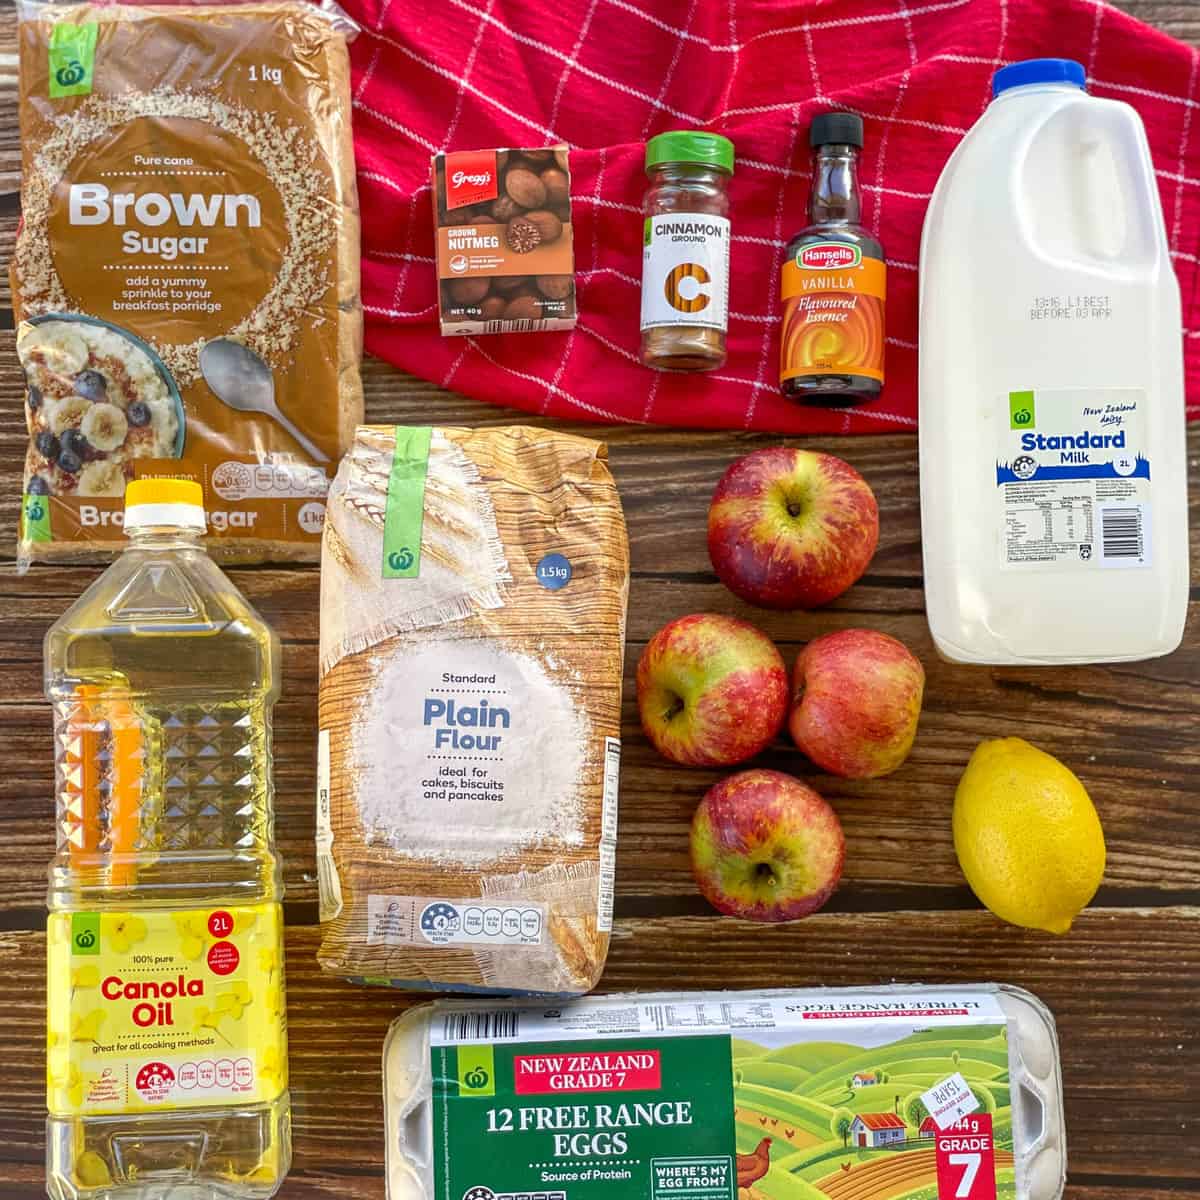 Ingredients used in the apple crunch cake from Countdown Supermarkets, see recipe card for details 